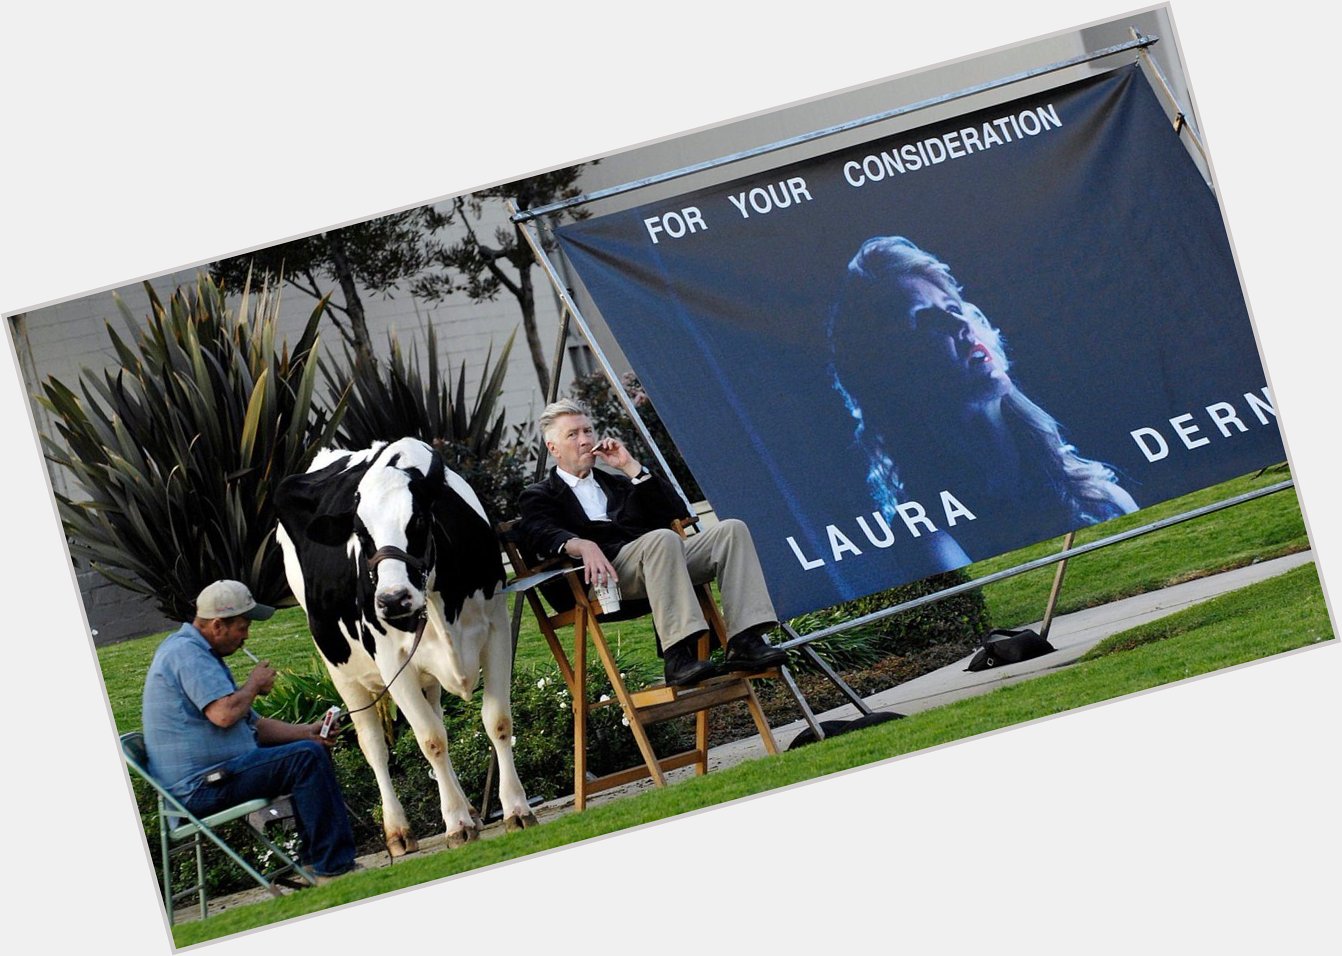 Happy birthday to my unofficial dad David Lynch, seen here campaigning for Laura Dern\s Oscar nomination with a cow: 